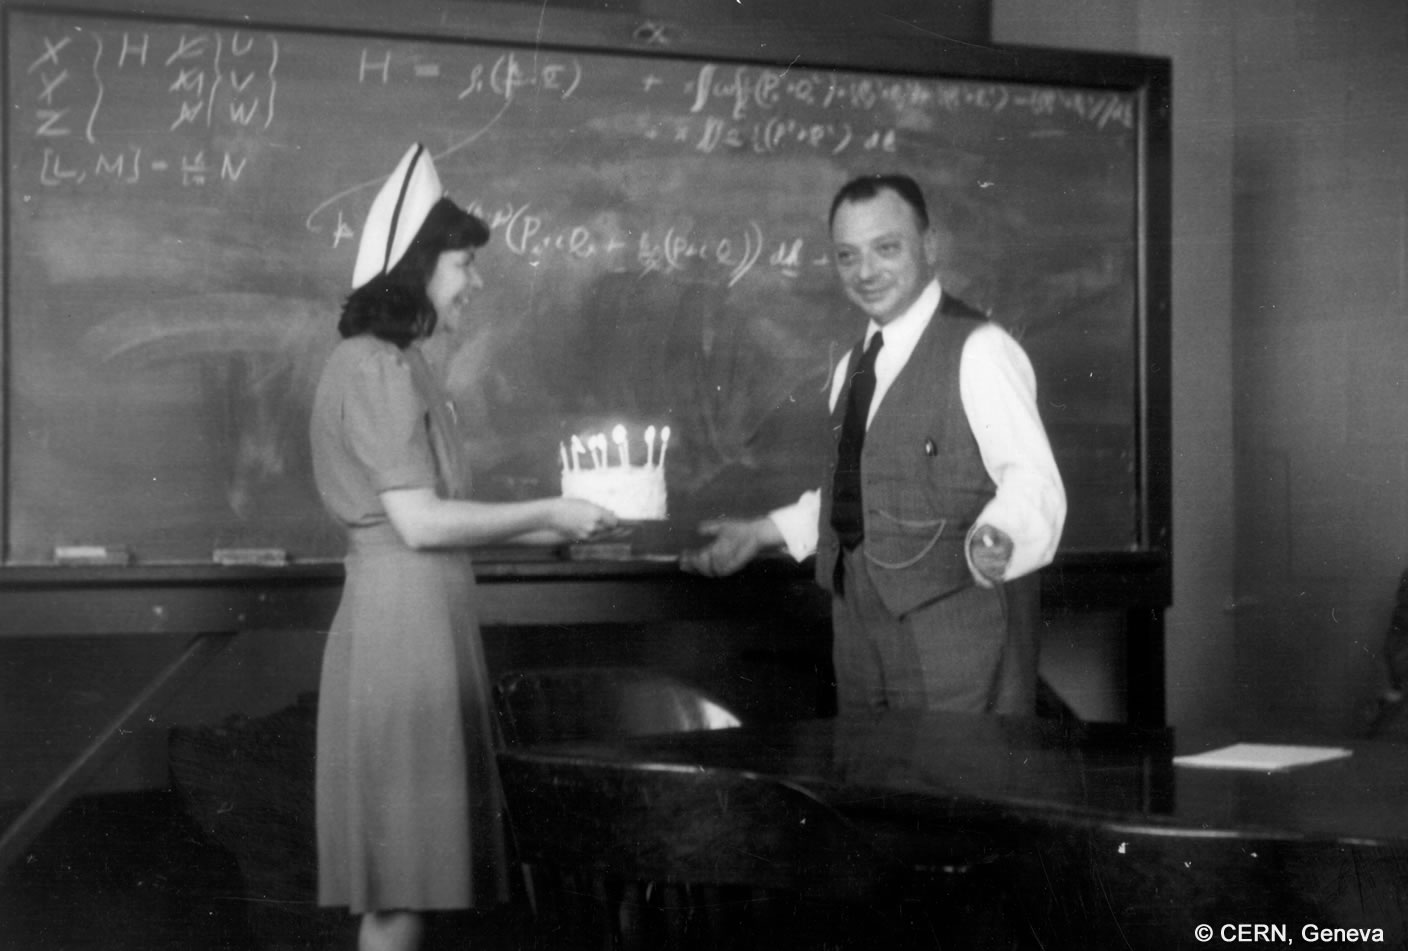 Wolfgang Pauli receives a cake for his 45th birthday from a lady